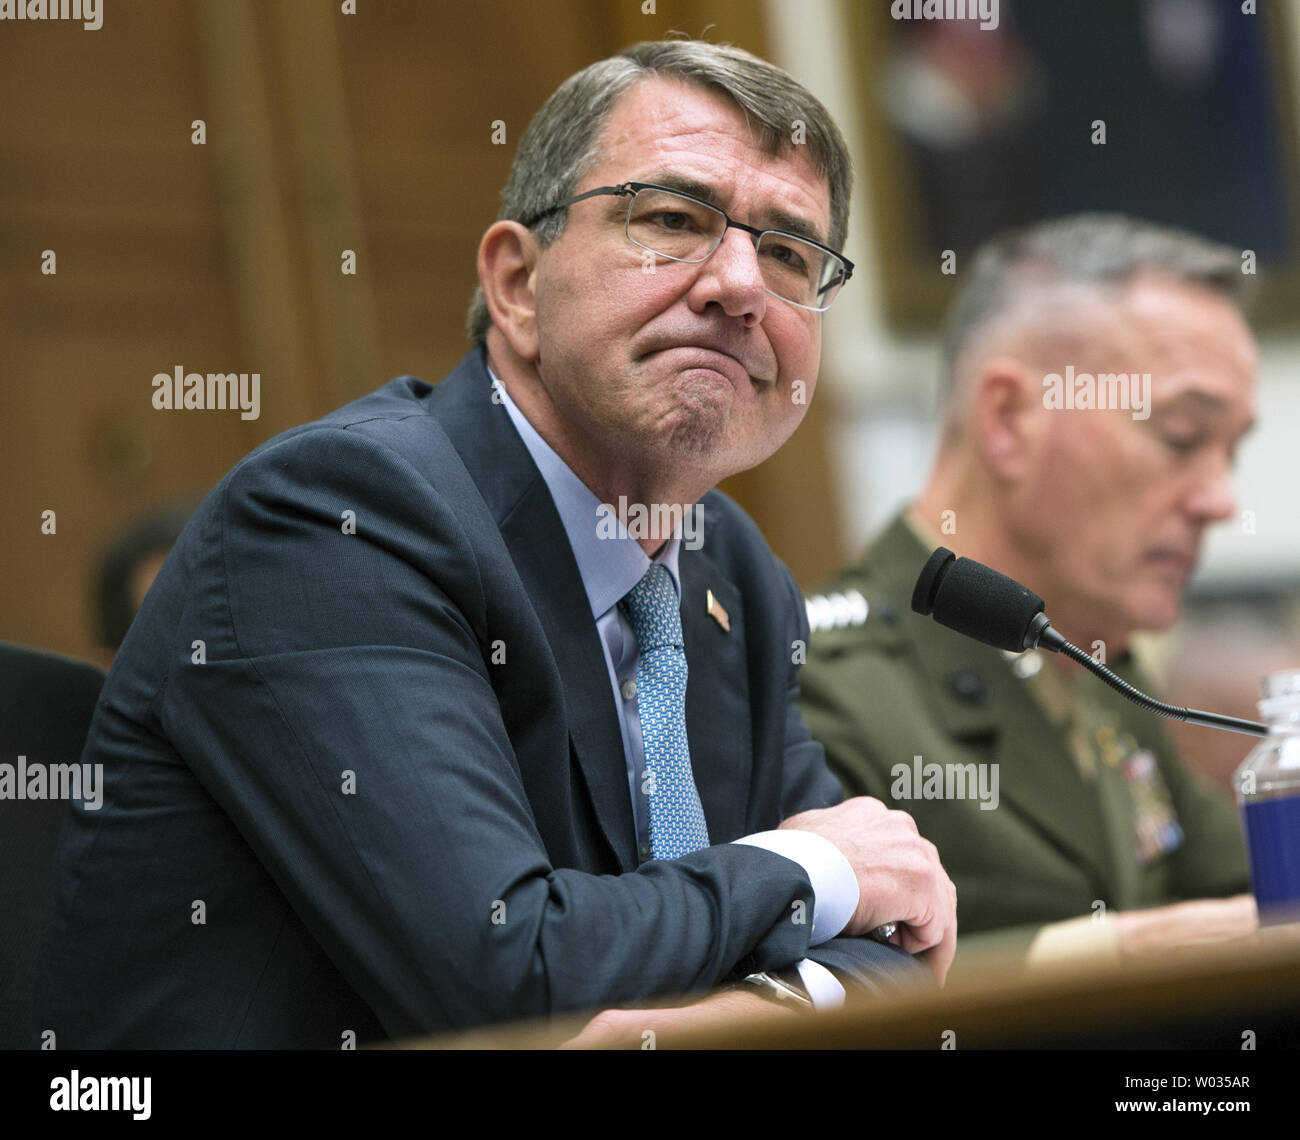 Secretary of Defense Ashton Carter (L) and  Chairman of the Joint Chiefs of Staff General Joseph F. Dunford, Jr., USMC, testify during a House Armed Services Committee hearing on the U.S. Strategy for Syria and Iraq and its implications for the region, on Capitol Hill in Washington, D.C. on December 1, 2015. Photo by Kevin Dietsch/UPI. Stock Photo